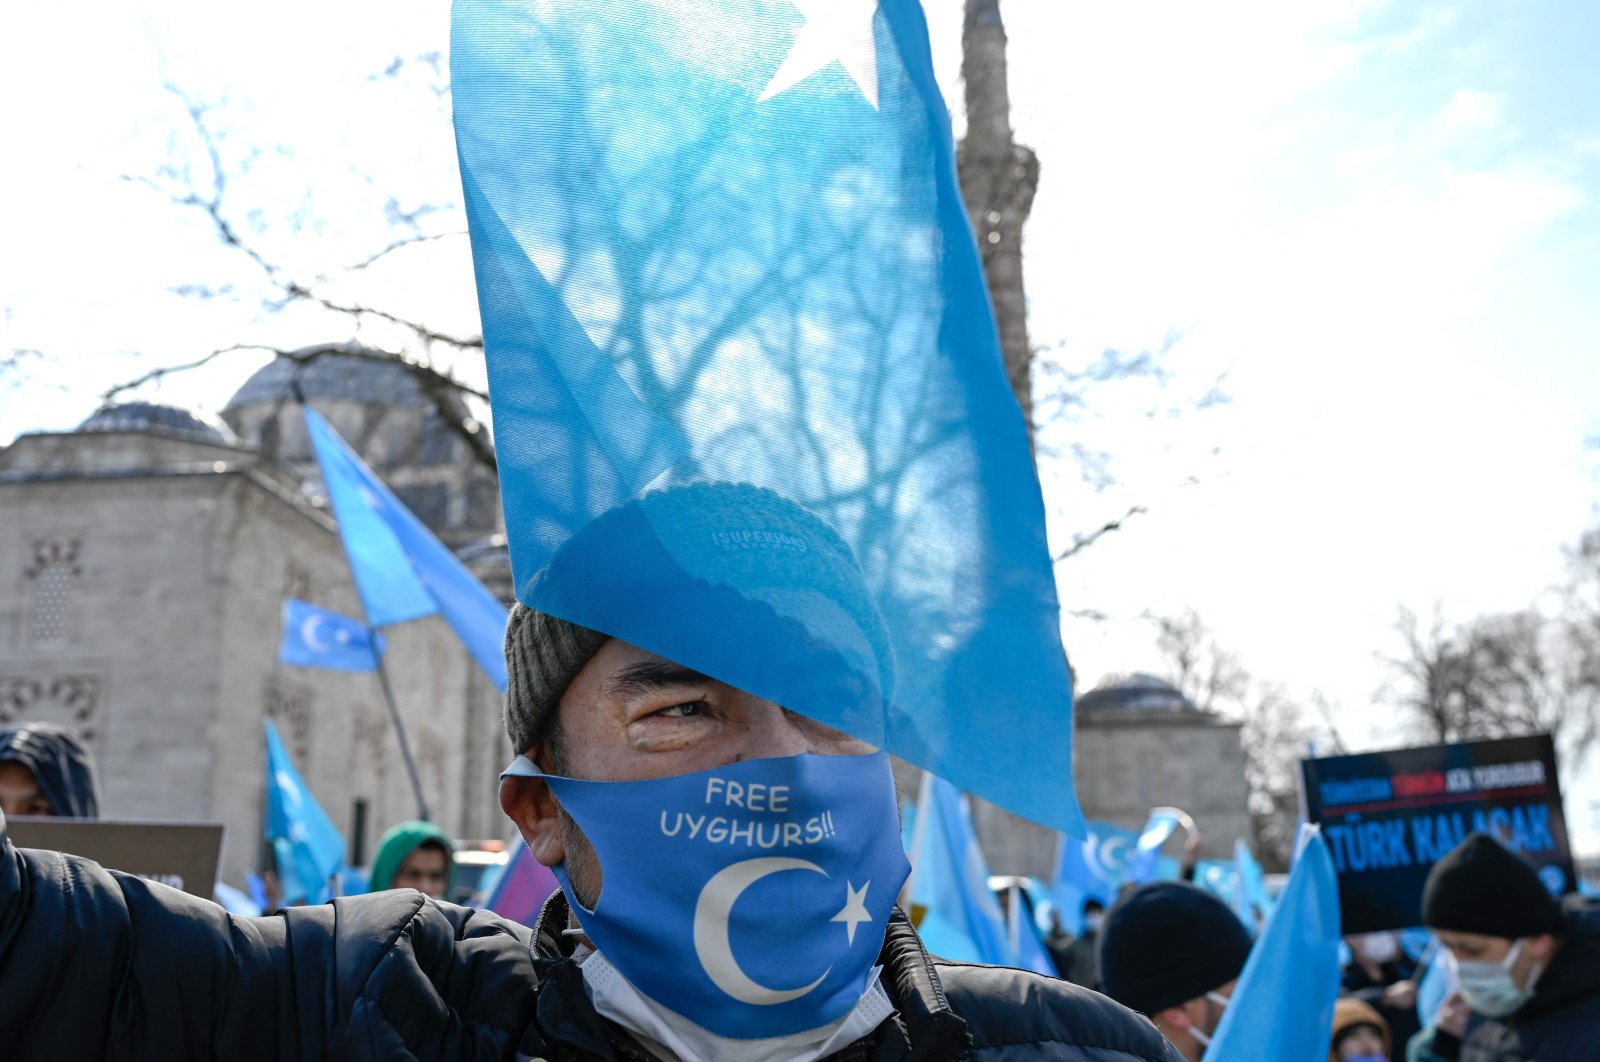 A protester from the Uyghur community living in Turkey attends a protest against the visit of China's Foreign Minister to Turkey, in Istanbul, March 25, 2021. (AFP Photo)